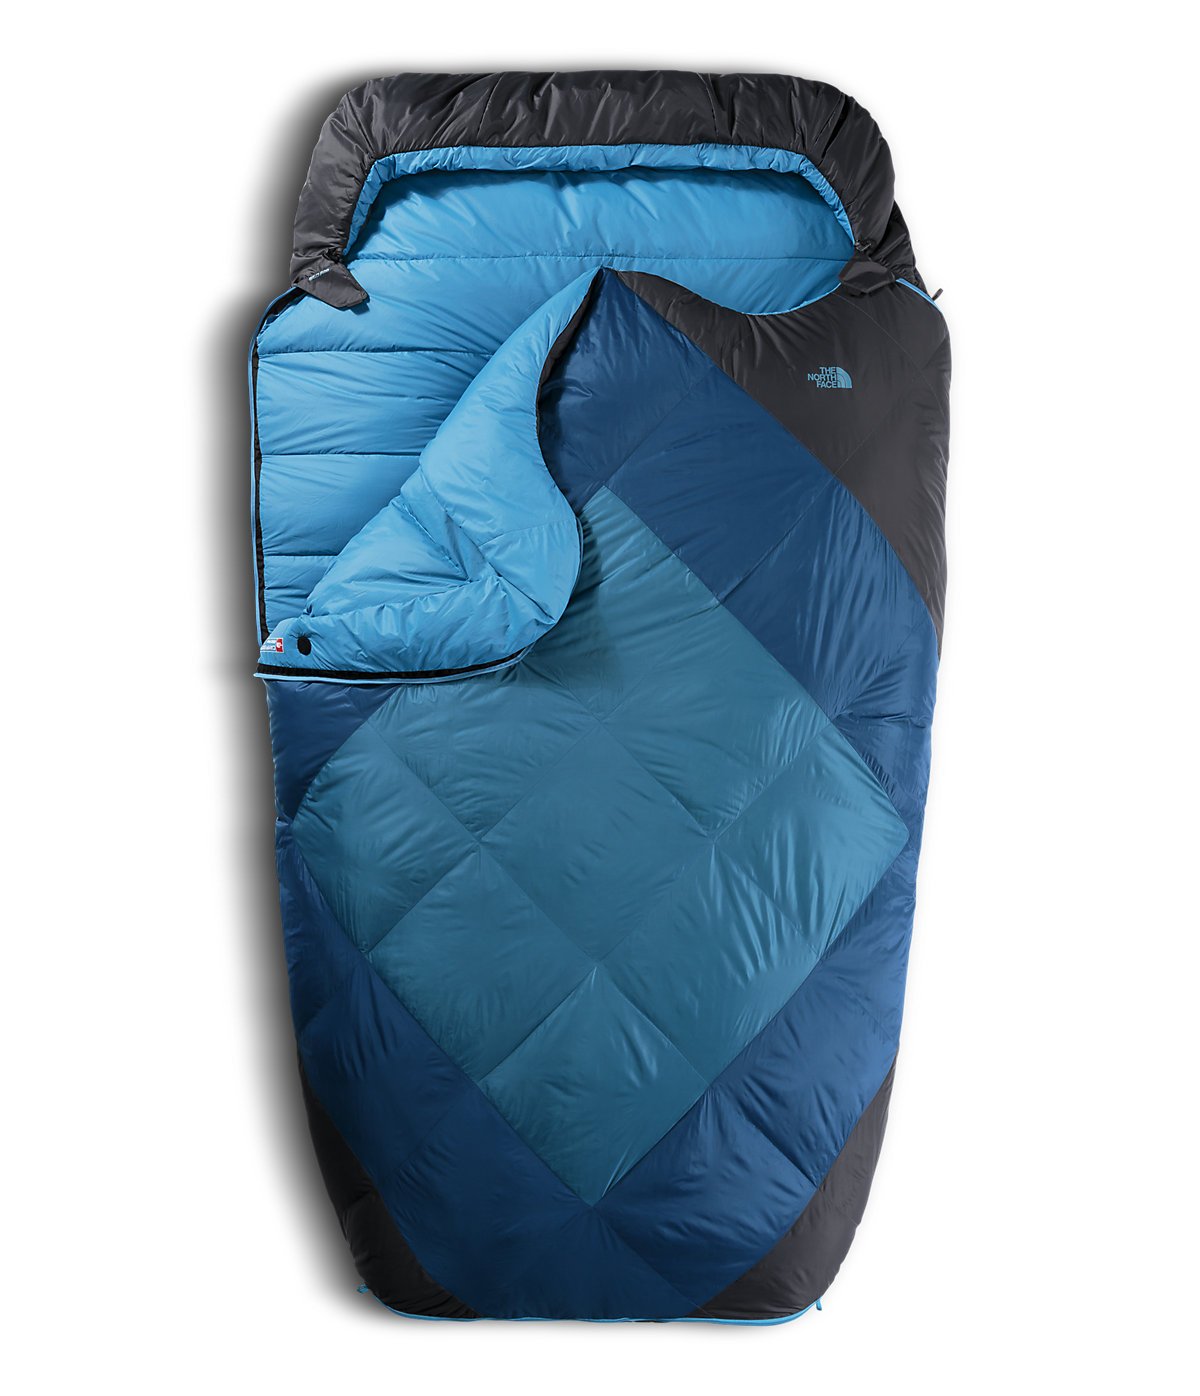 two person sleeping bag